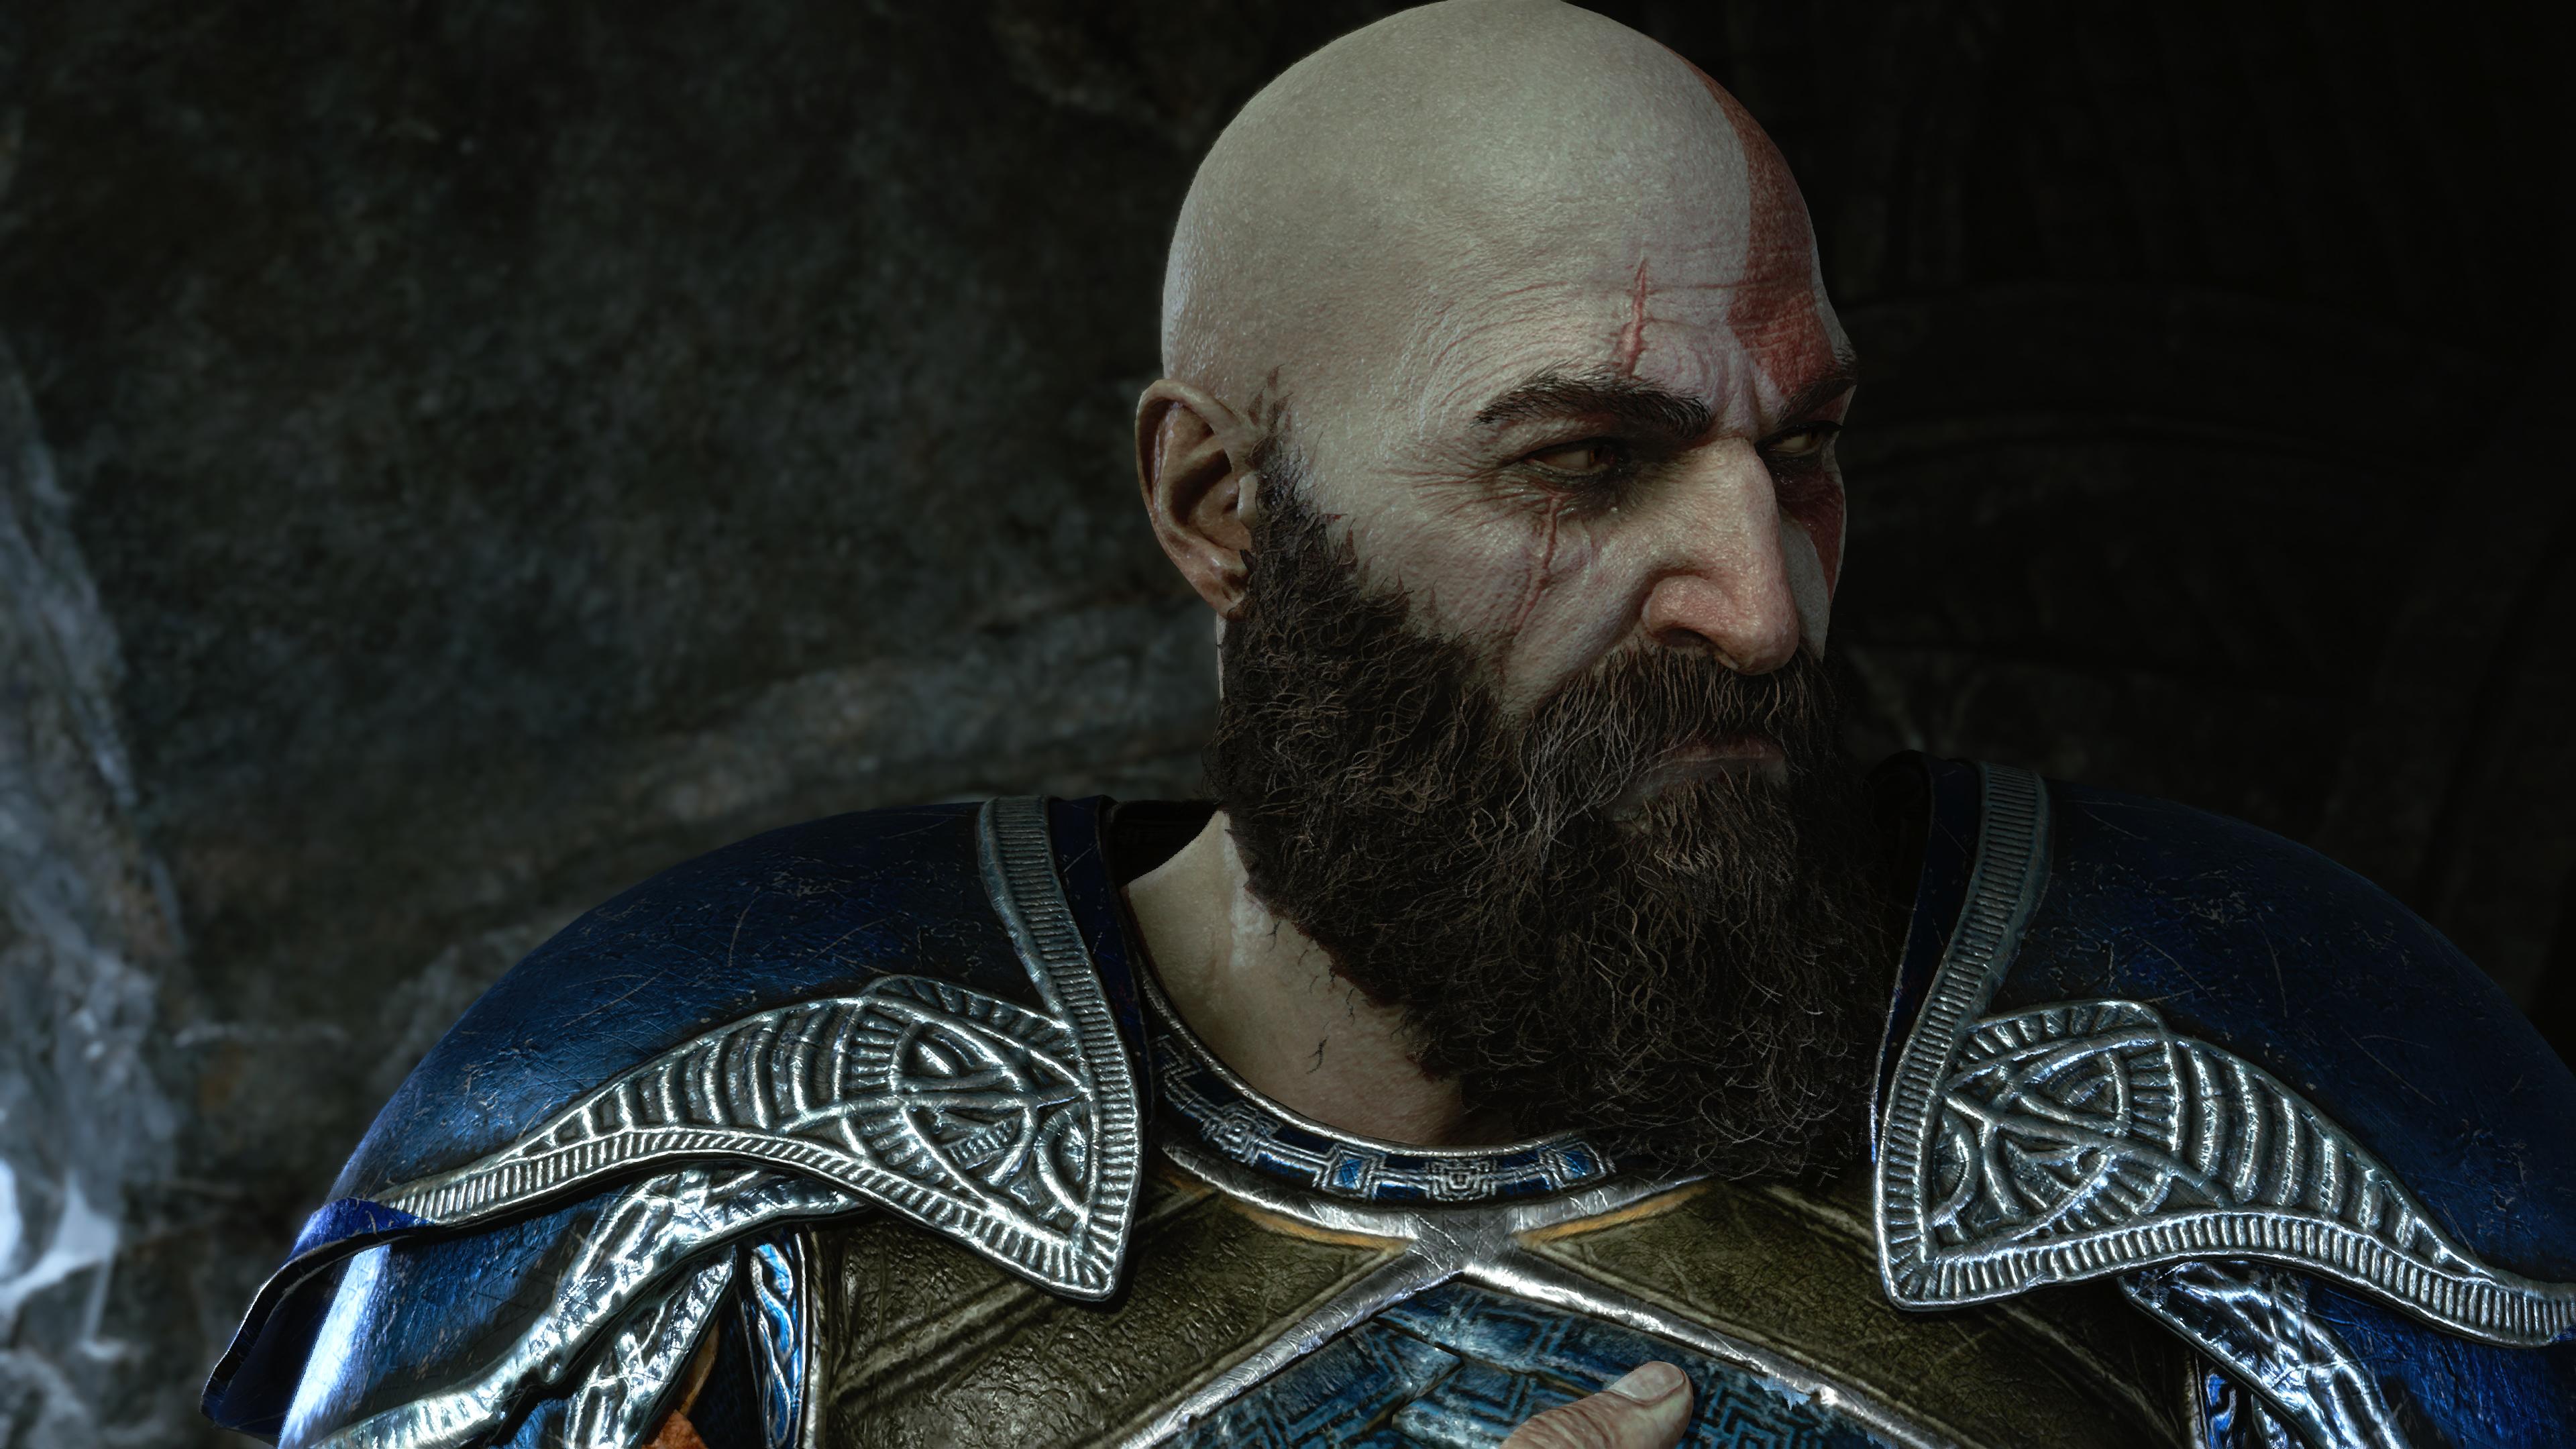 Who is Tyr? - Exploring the Mythology Behind God of War 4